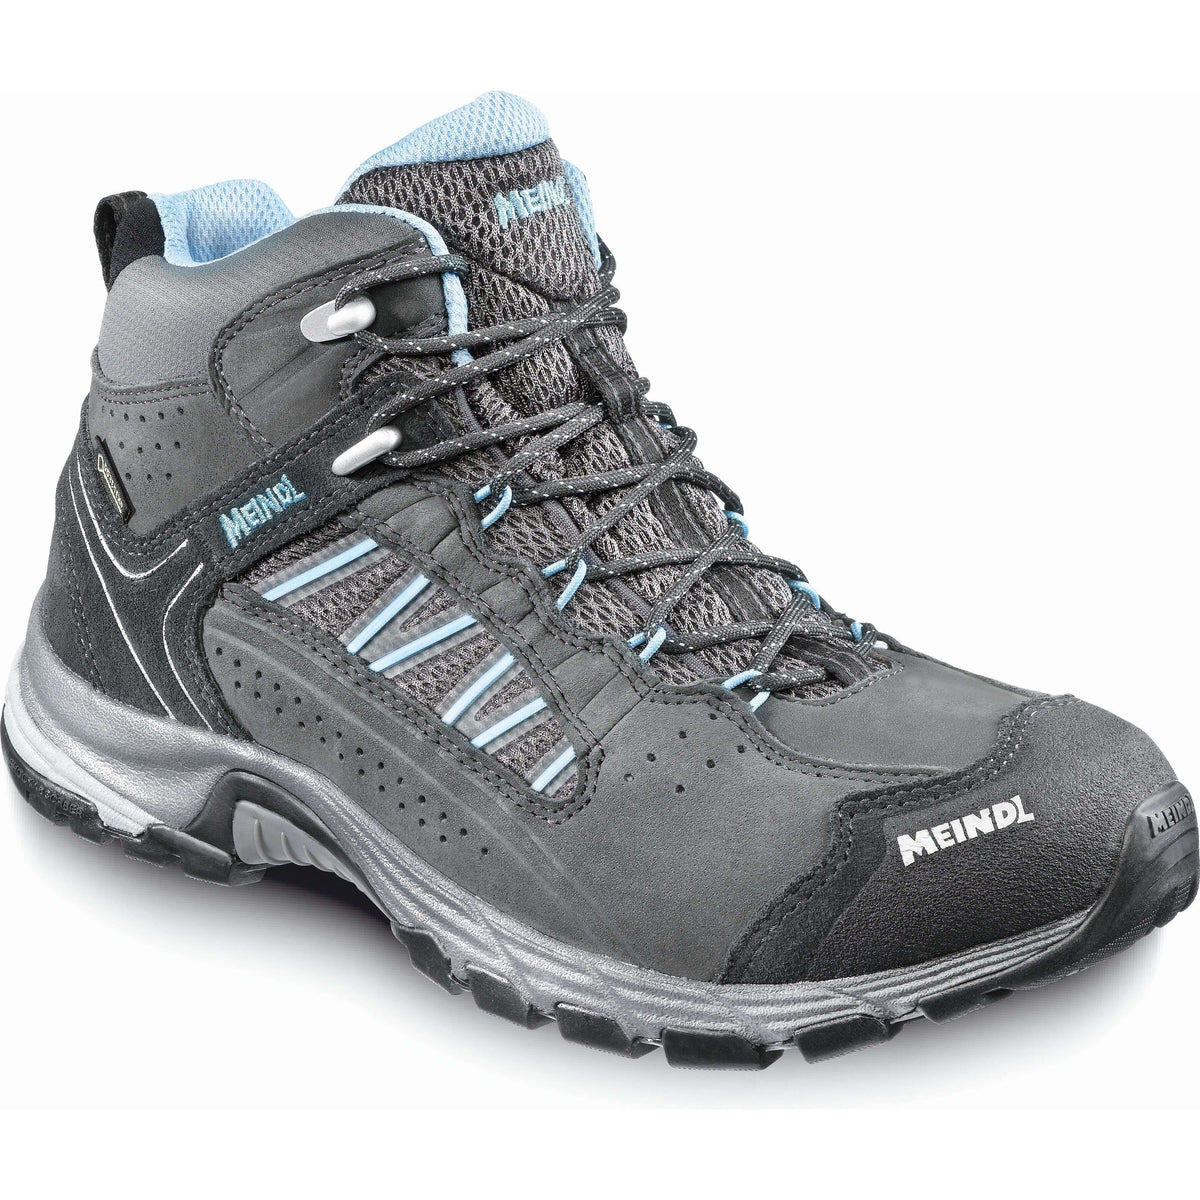 Meindl Journey Lady Mid GTX Wide Fit Walking Boots - Anthracite/Blue